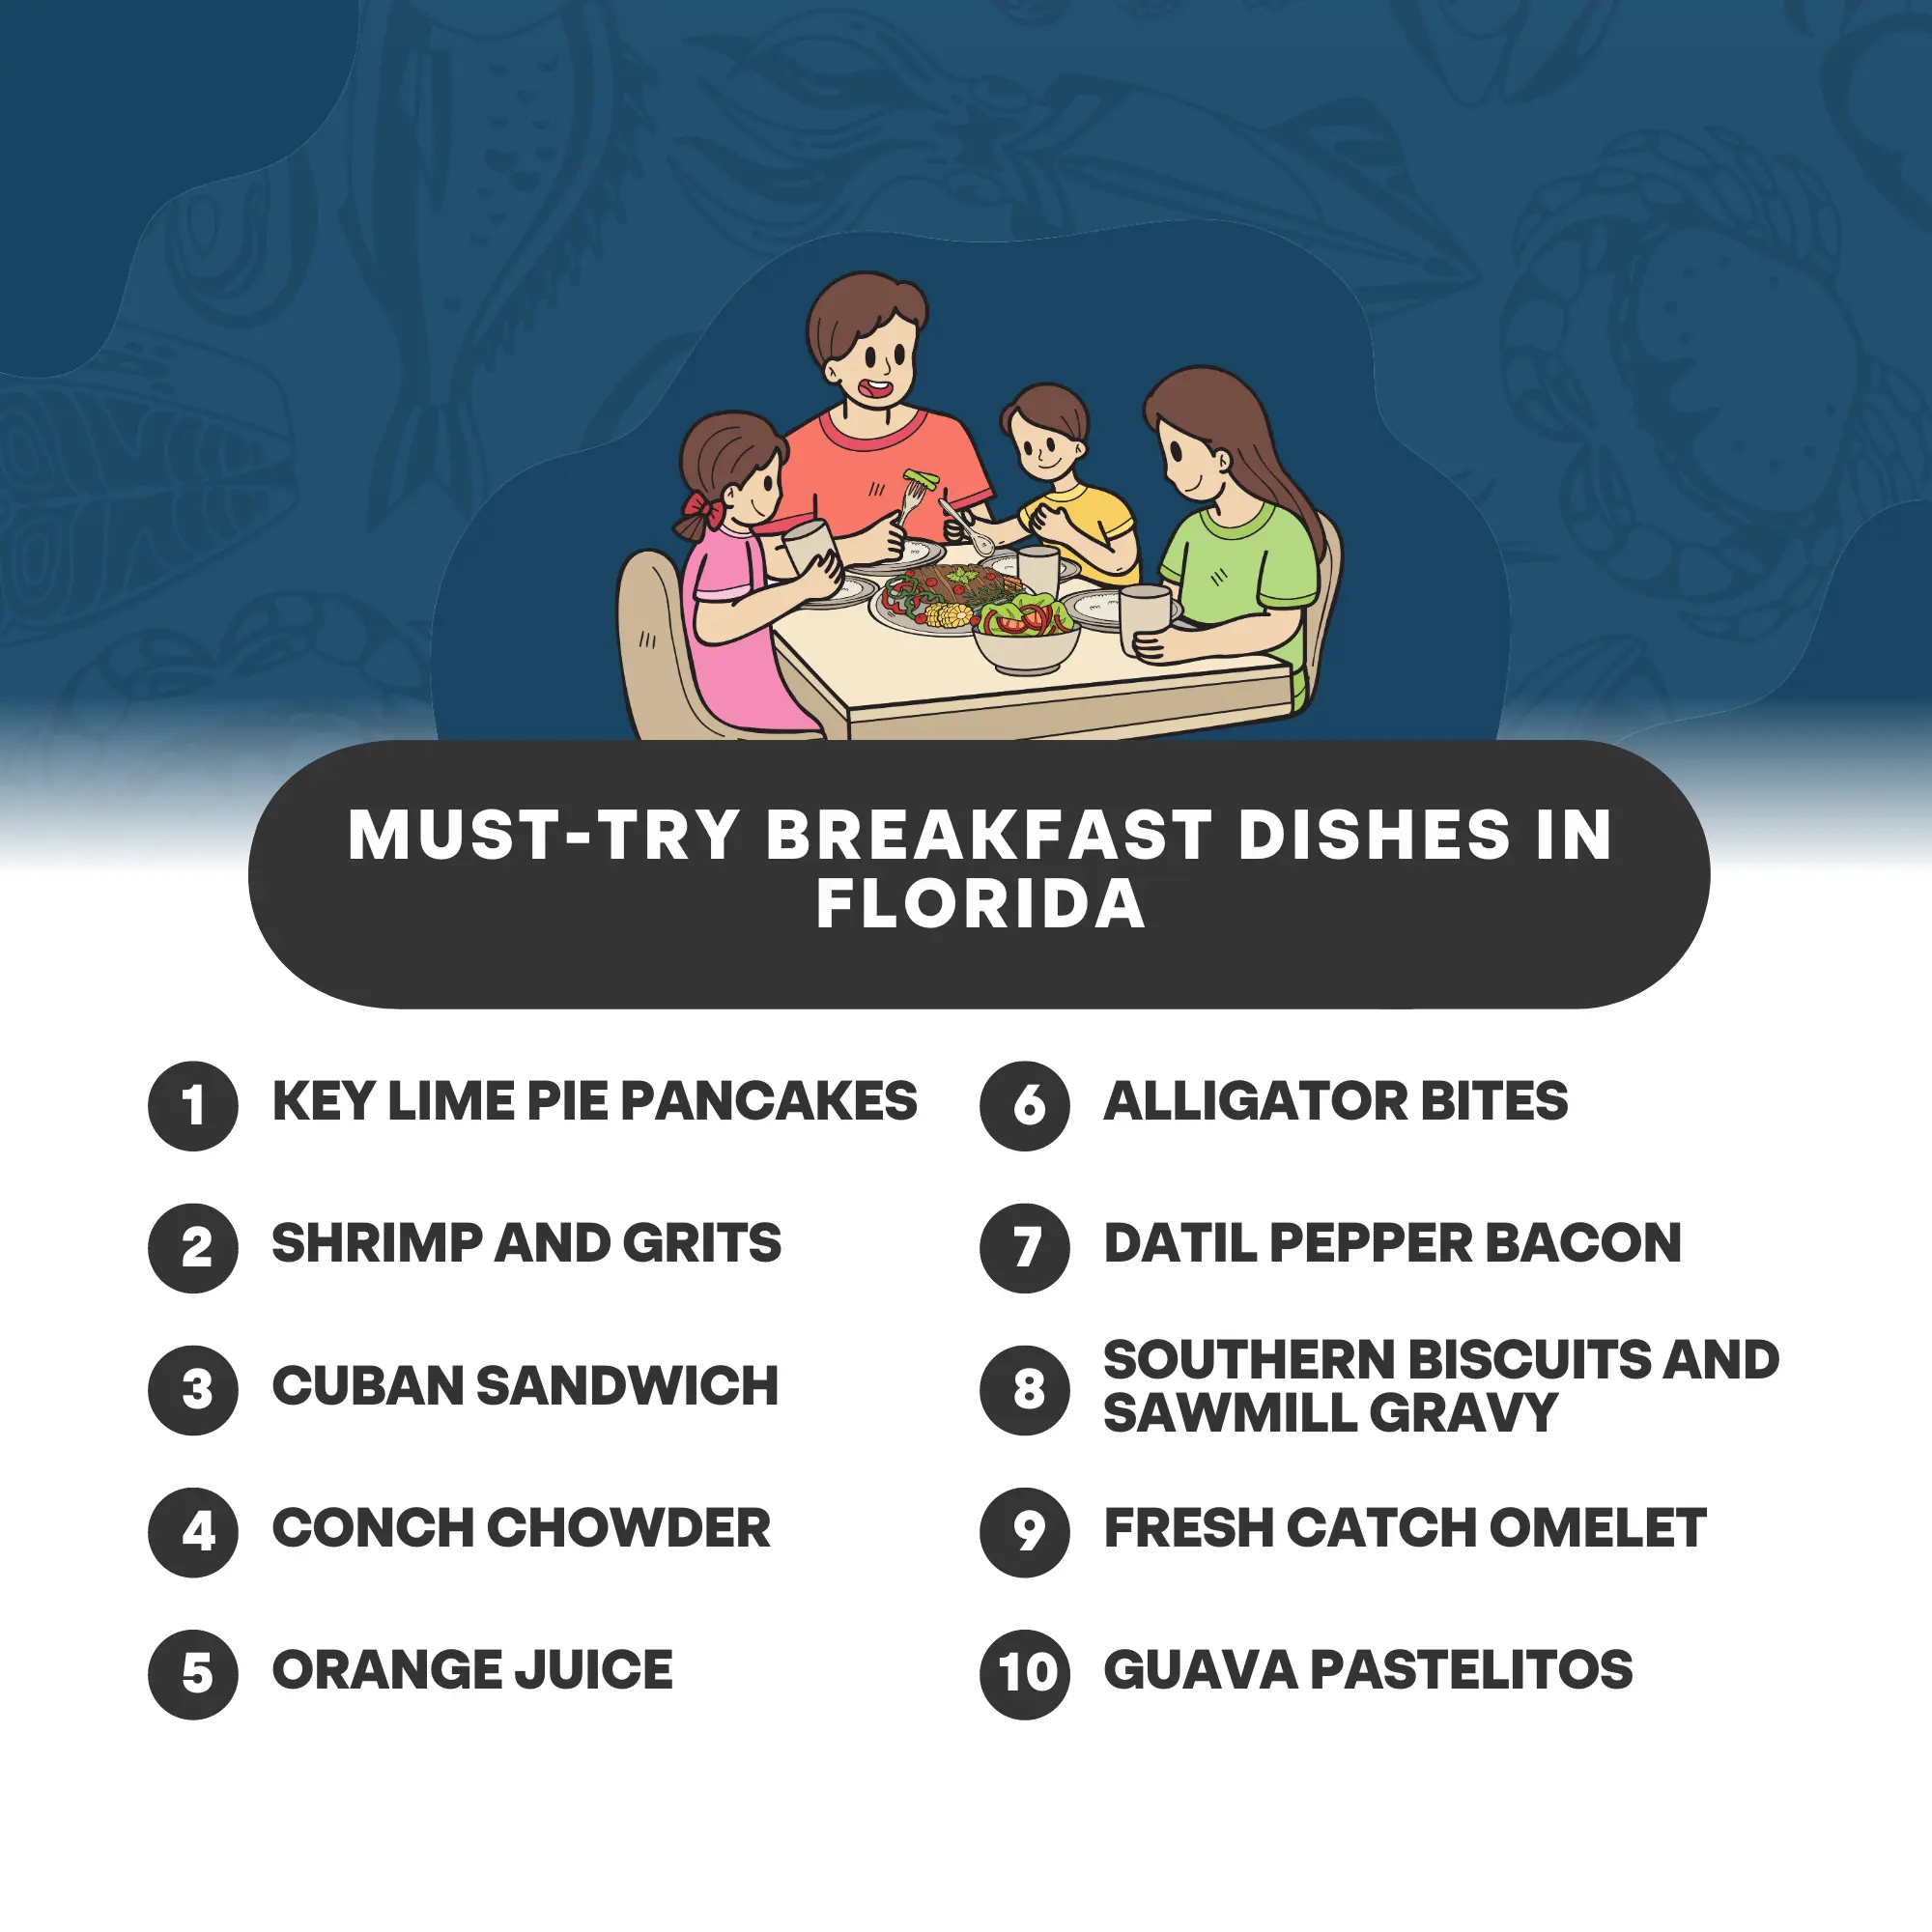 Must-Try Breakfast Dishes in Florida